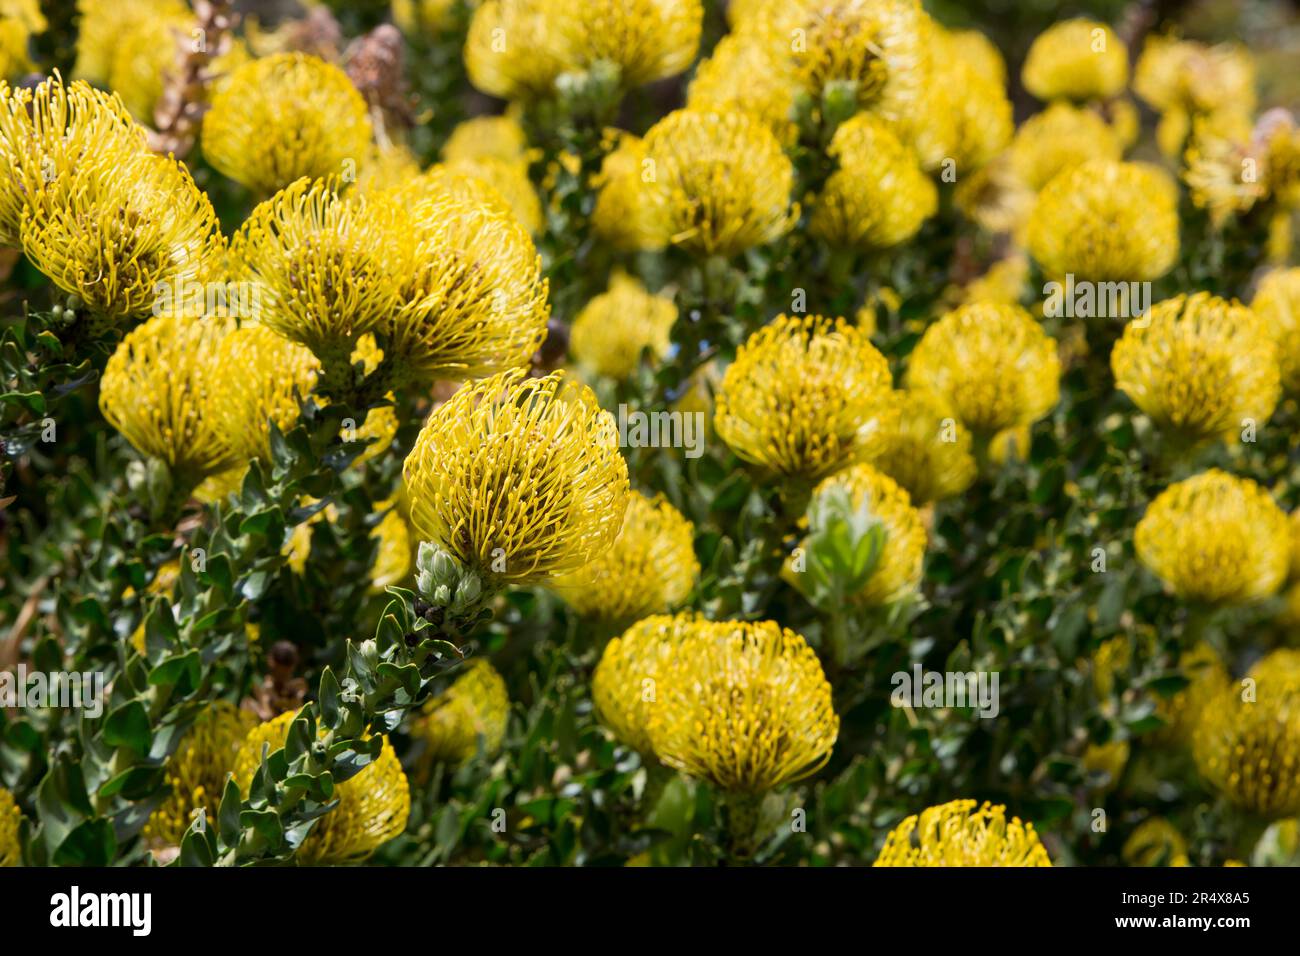 Close-up of yellow, Leucospermum, Proteaceae commonly known as Pincushion Proteas found in Upcountry Maui Stock Photo